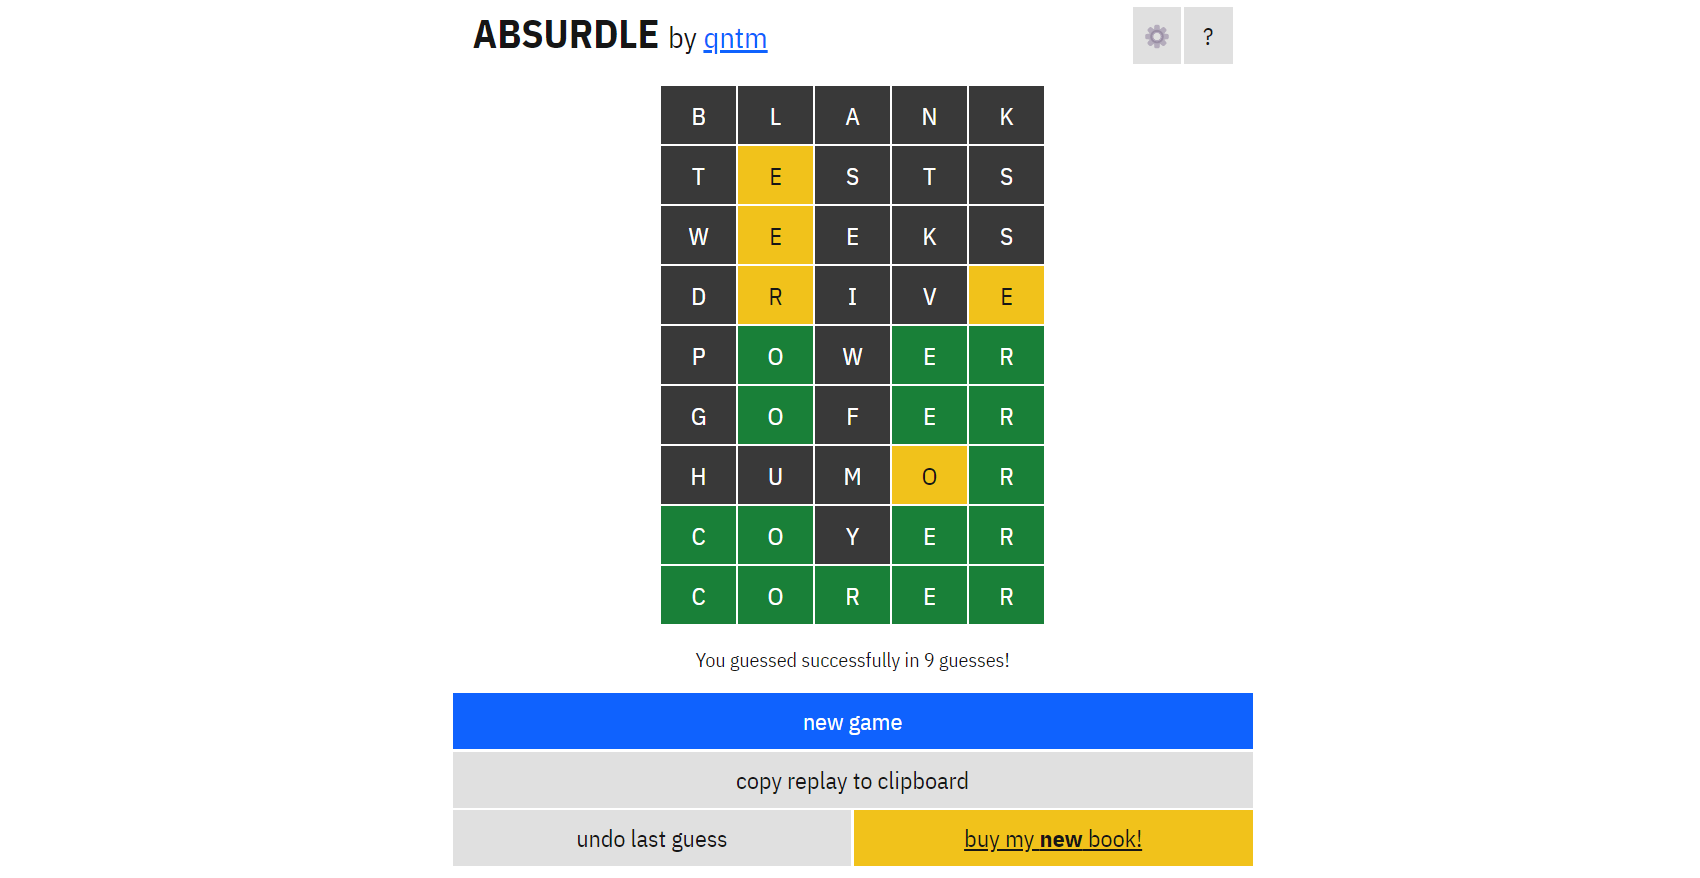 A player winning an Absurdle game.